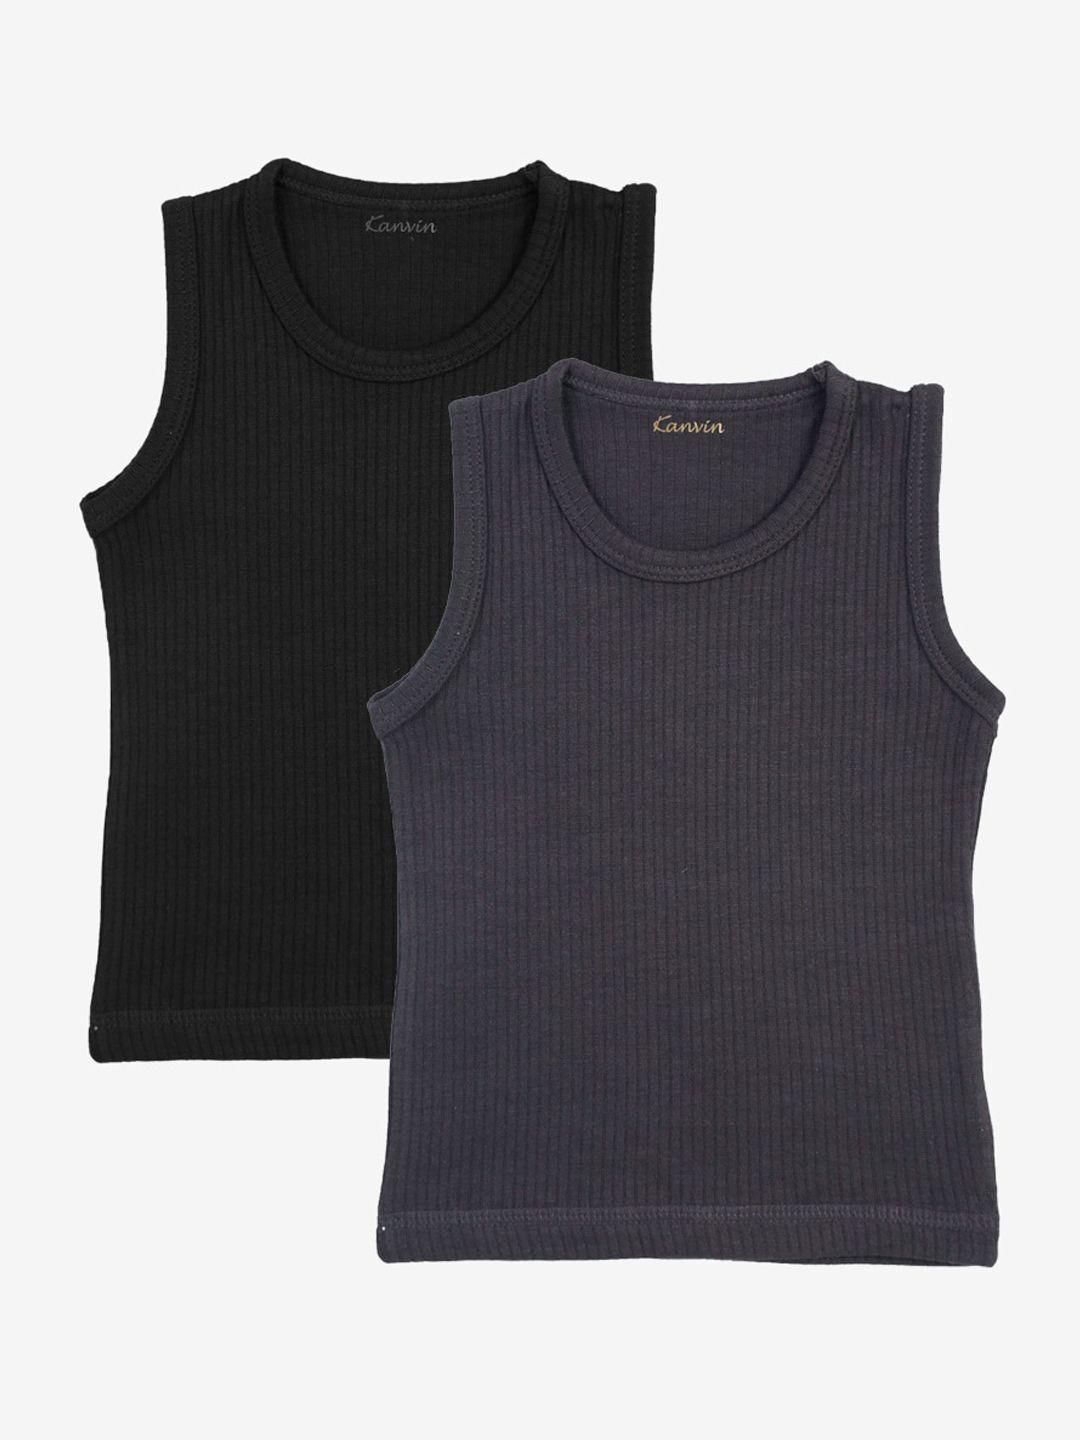 kanvin-boys-pack-of-2-ribbed-thermal-tops